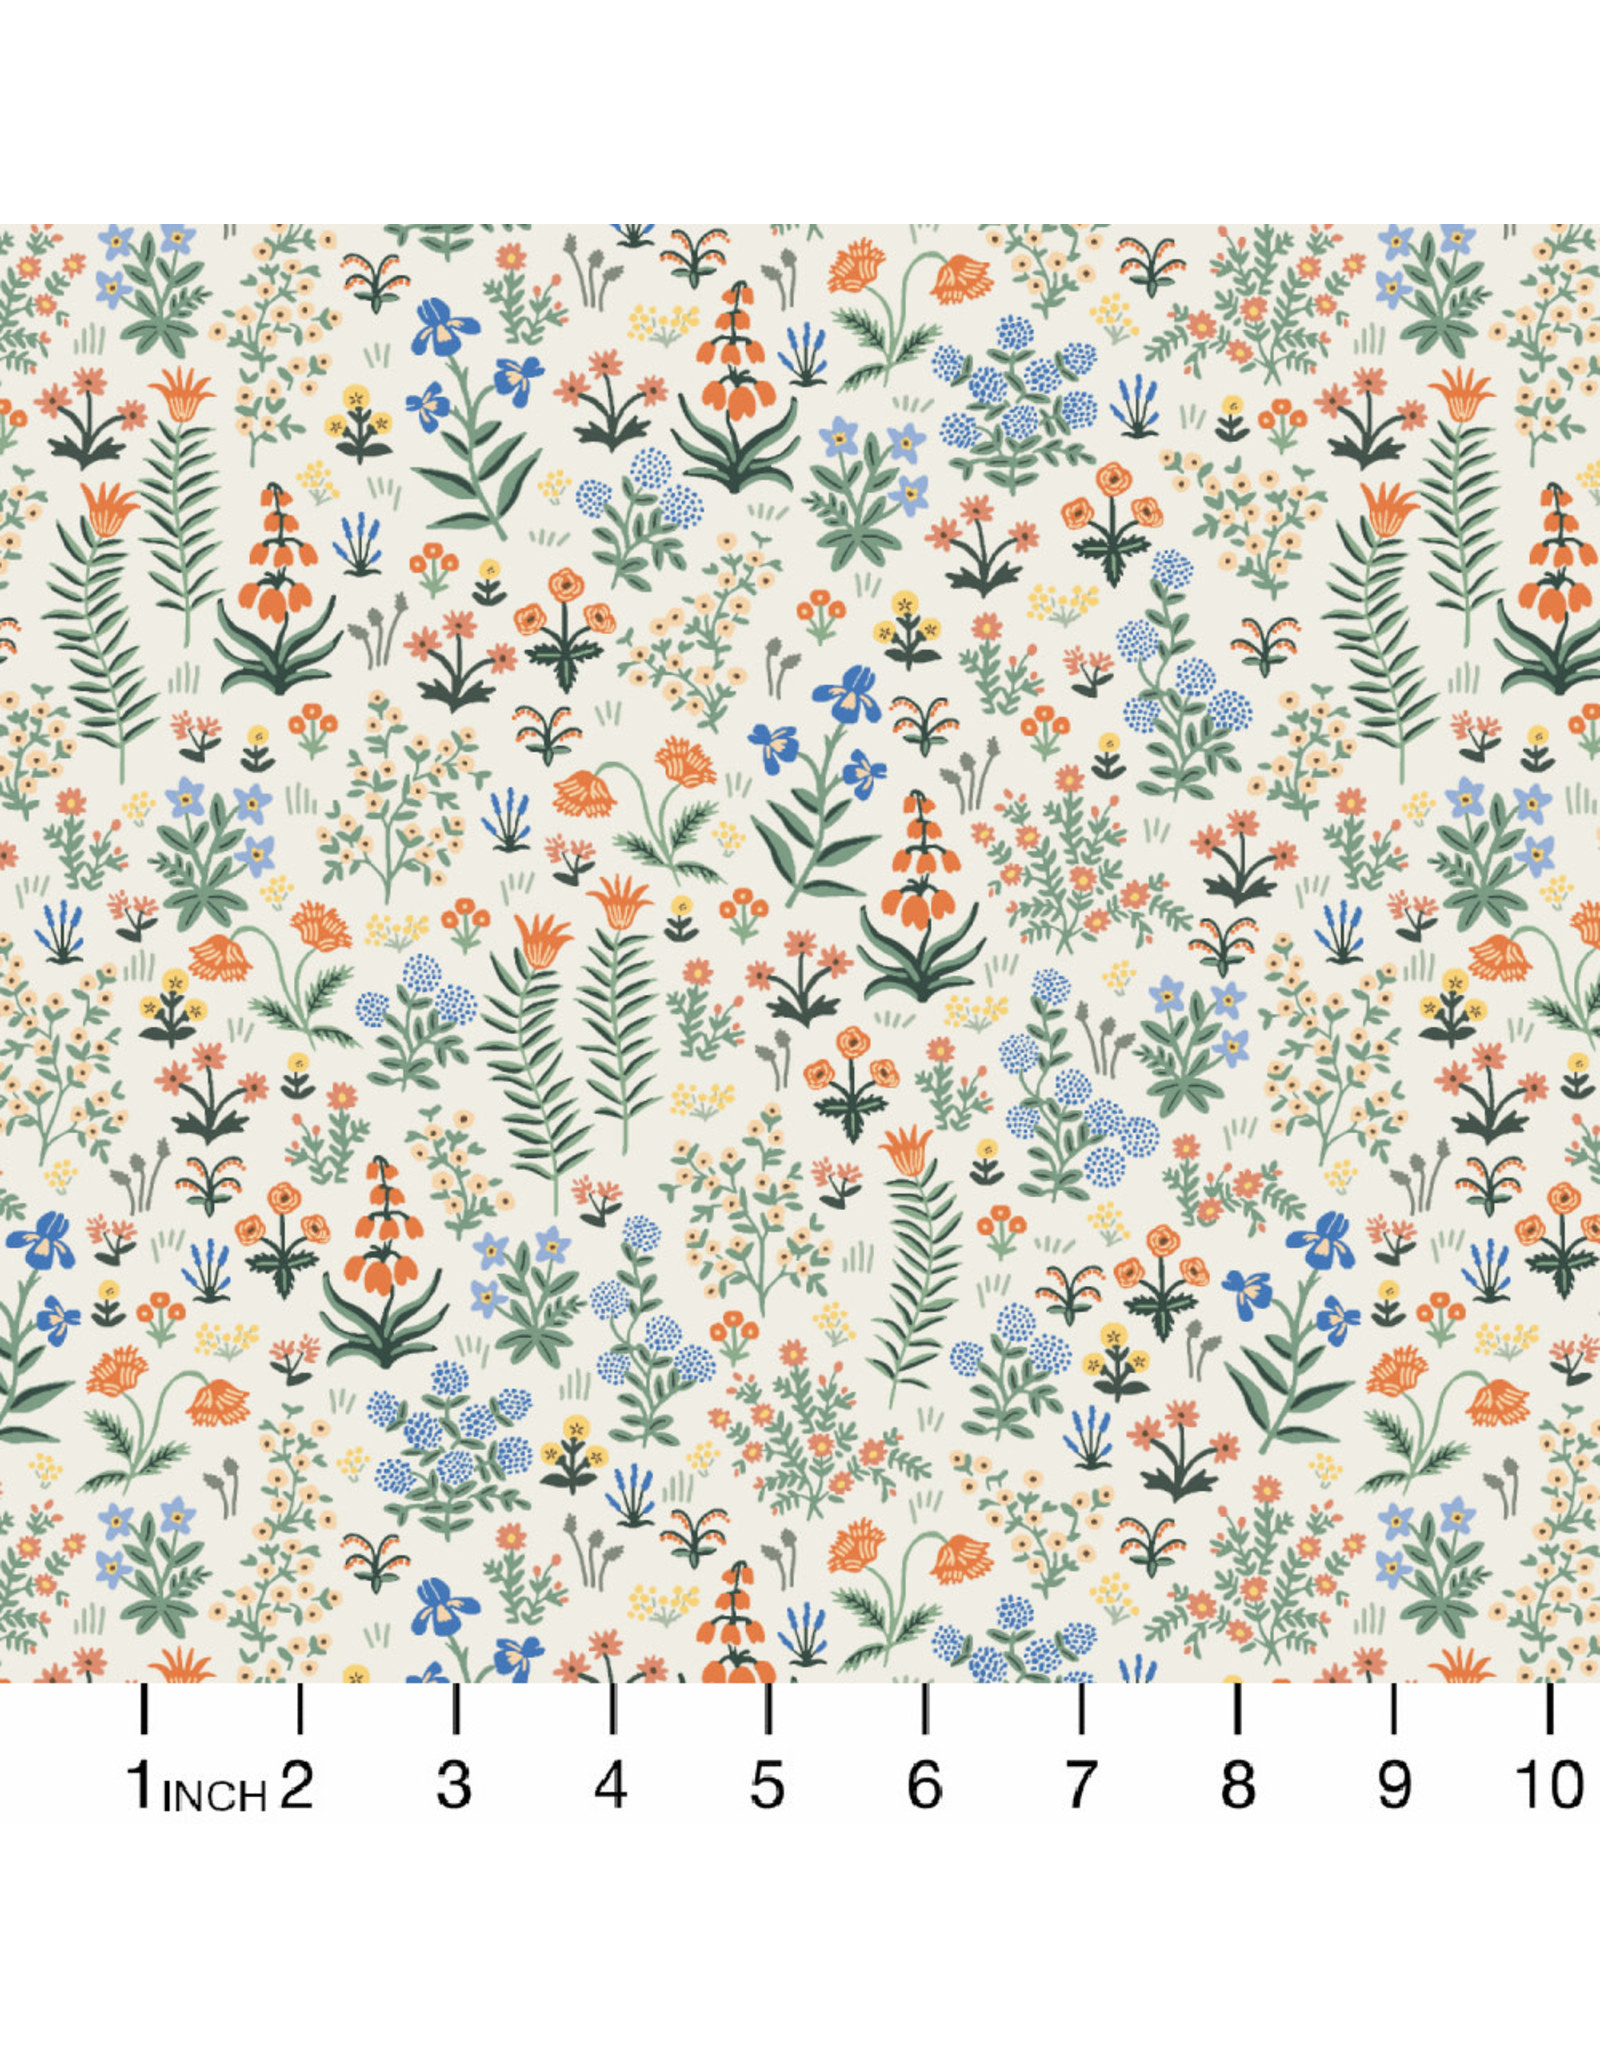 Rifle Paper Co. Camont, Menagerie Garden in Cream, Fabric Half-Yards